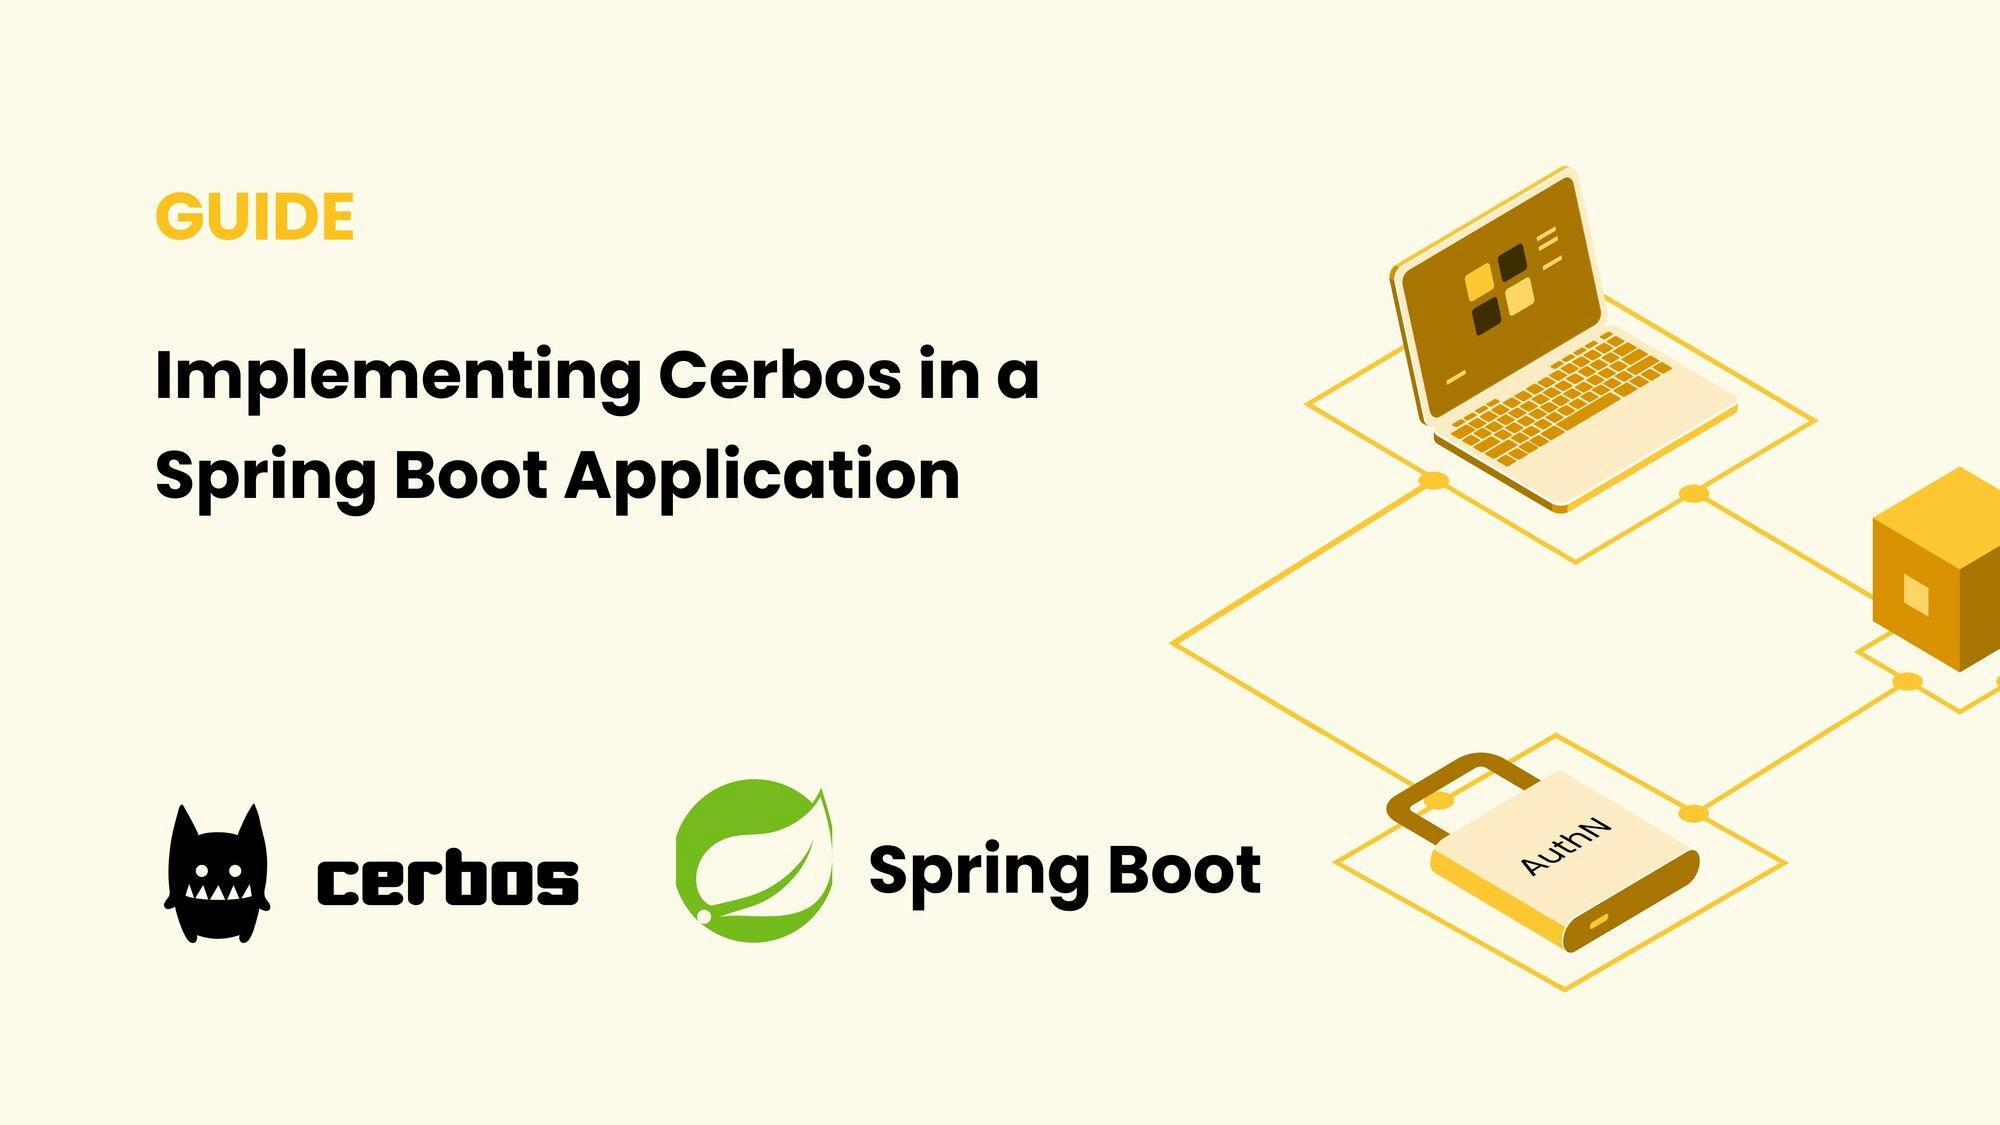 Implementing Cerbos in a Spring Boot Application